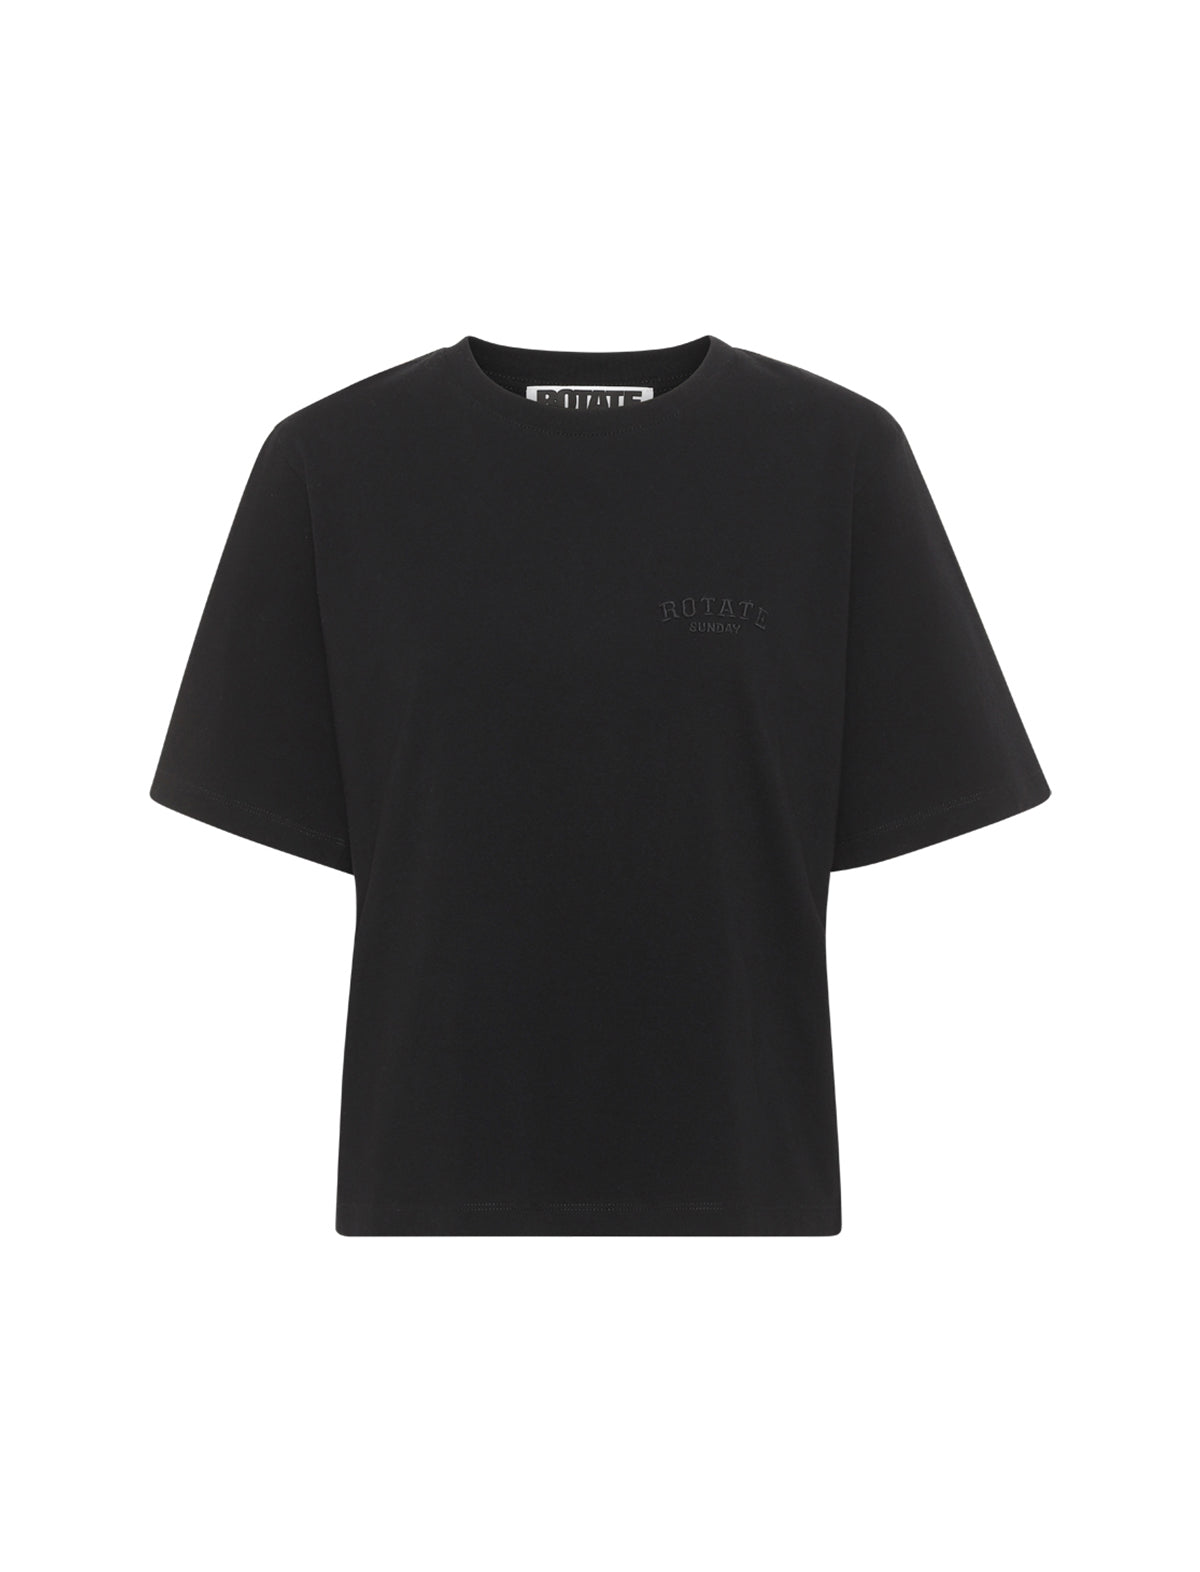 ROTATE Sunday 3 Aster T-Shirt in Black